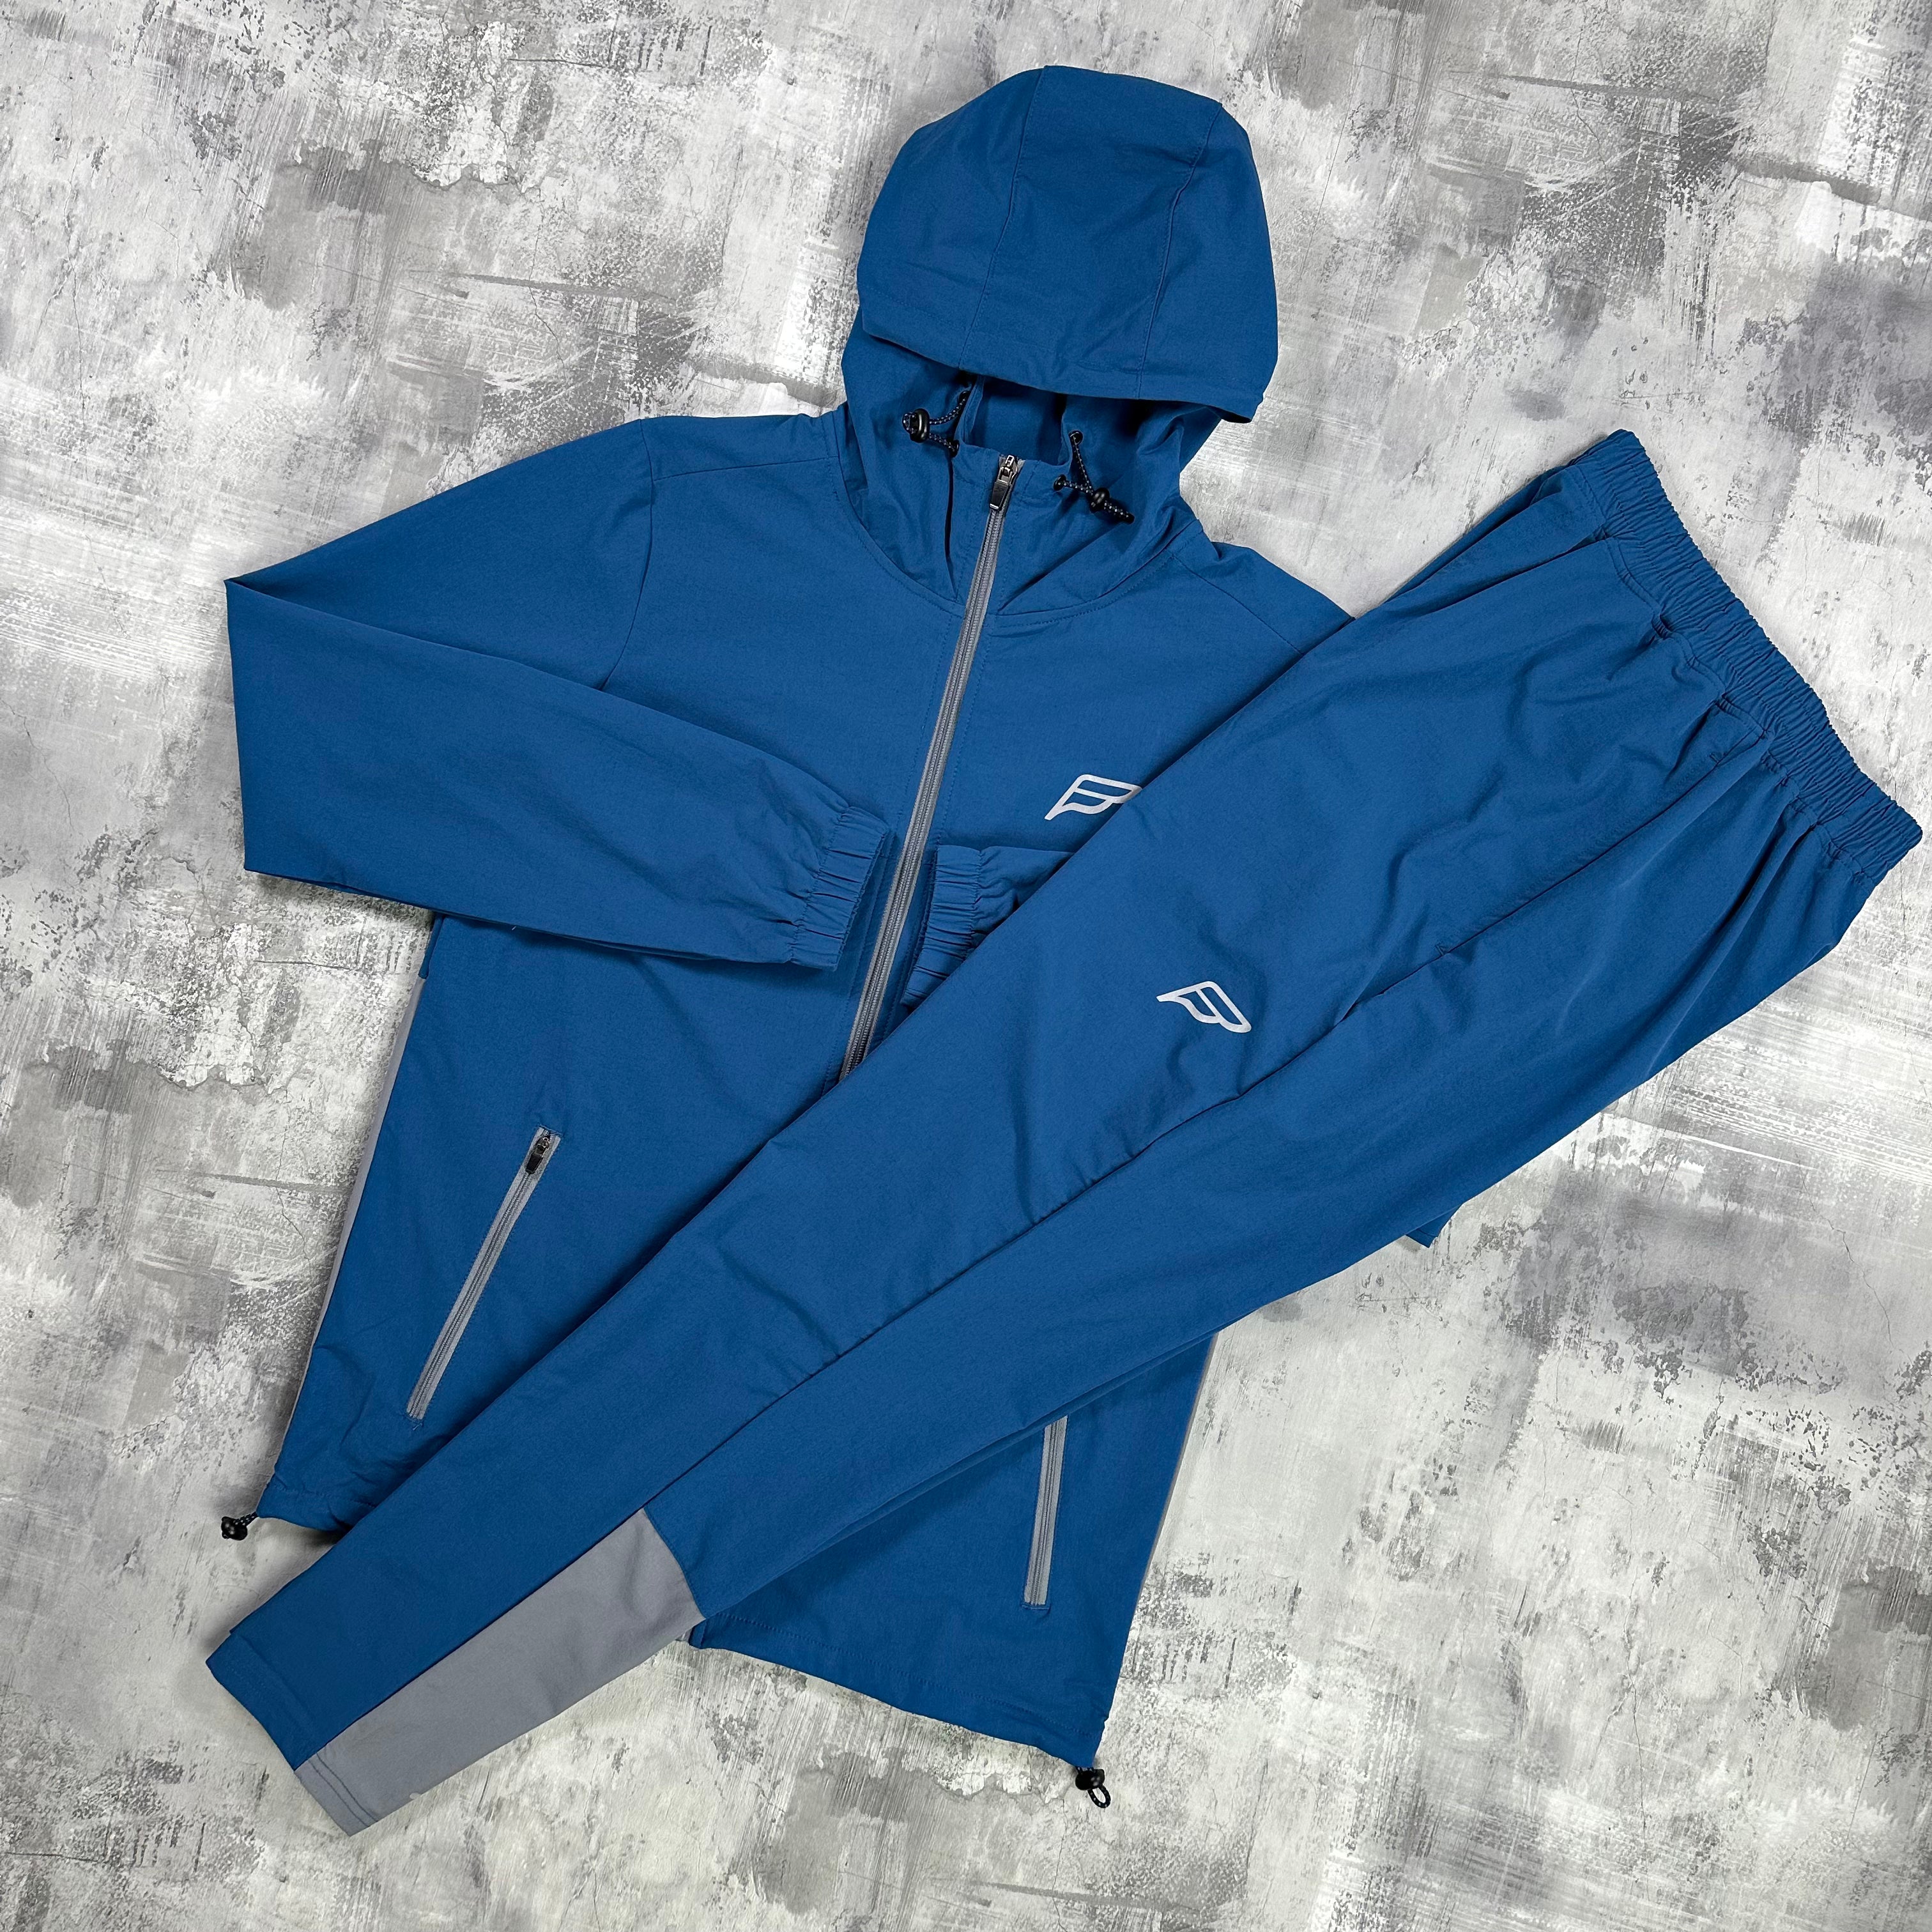 Frequency Thrive set Dynamic Blue - Jacket & Trousers